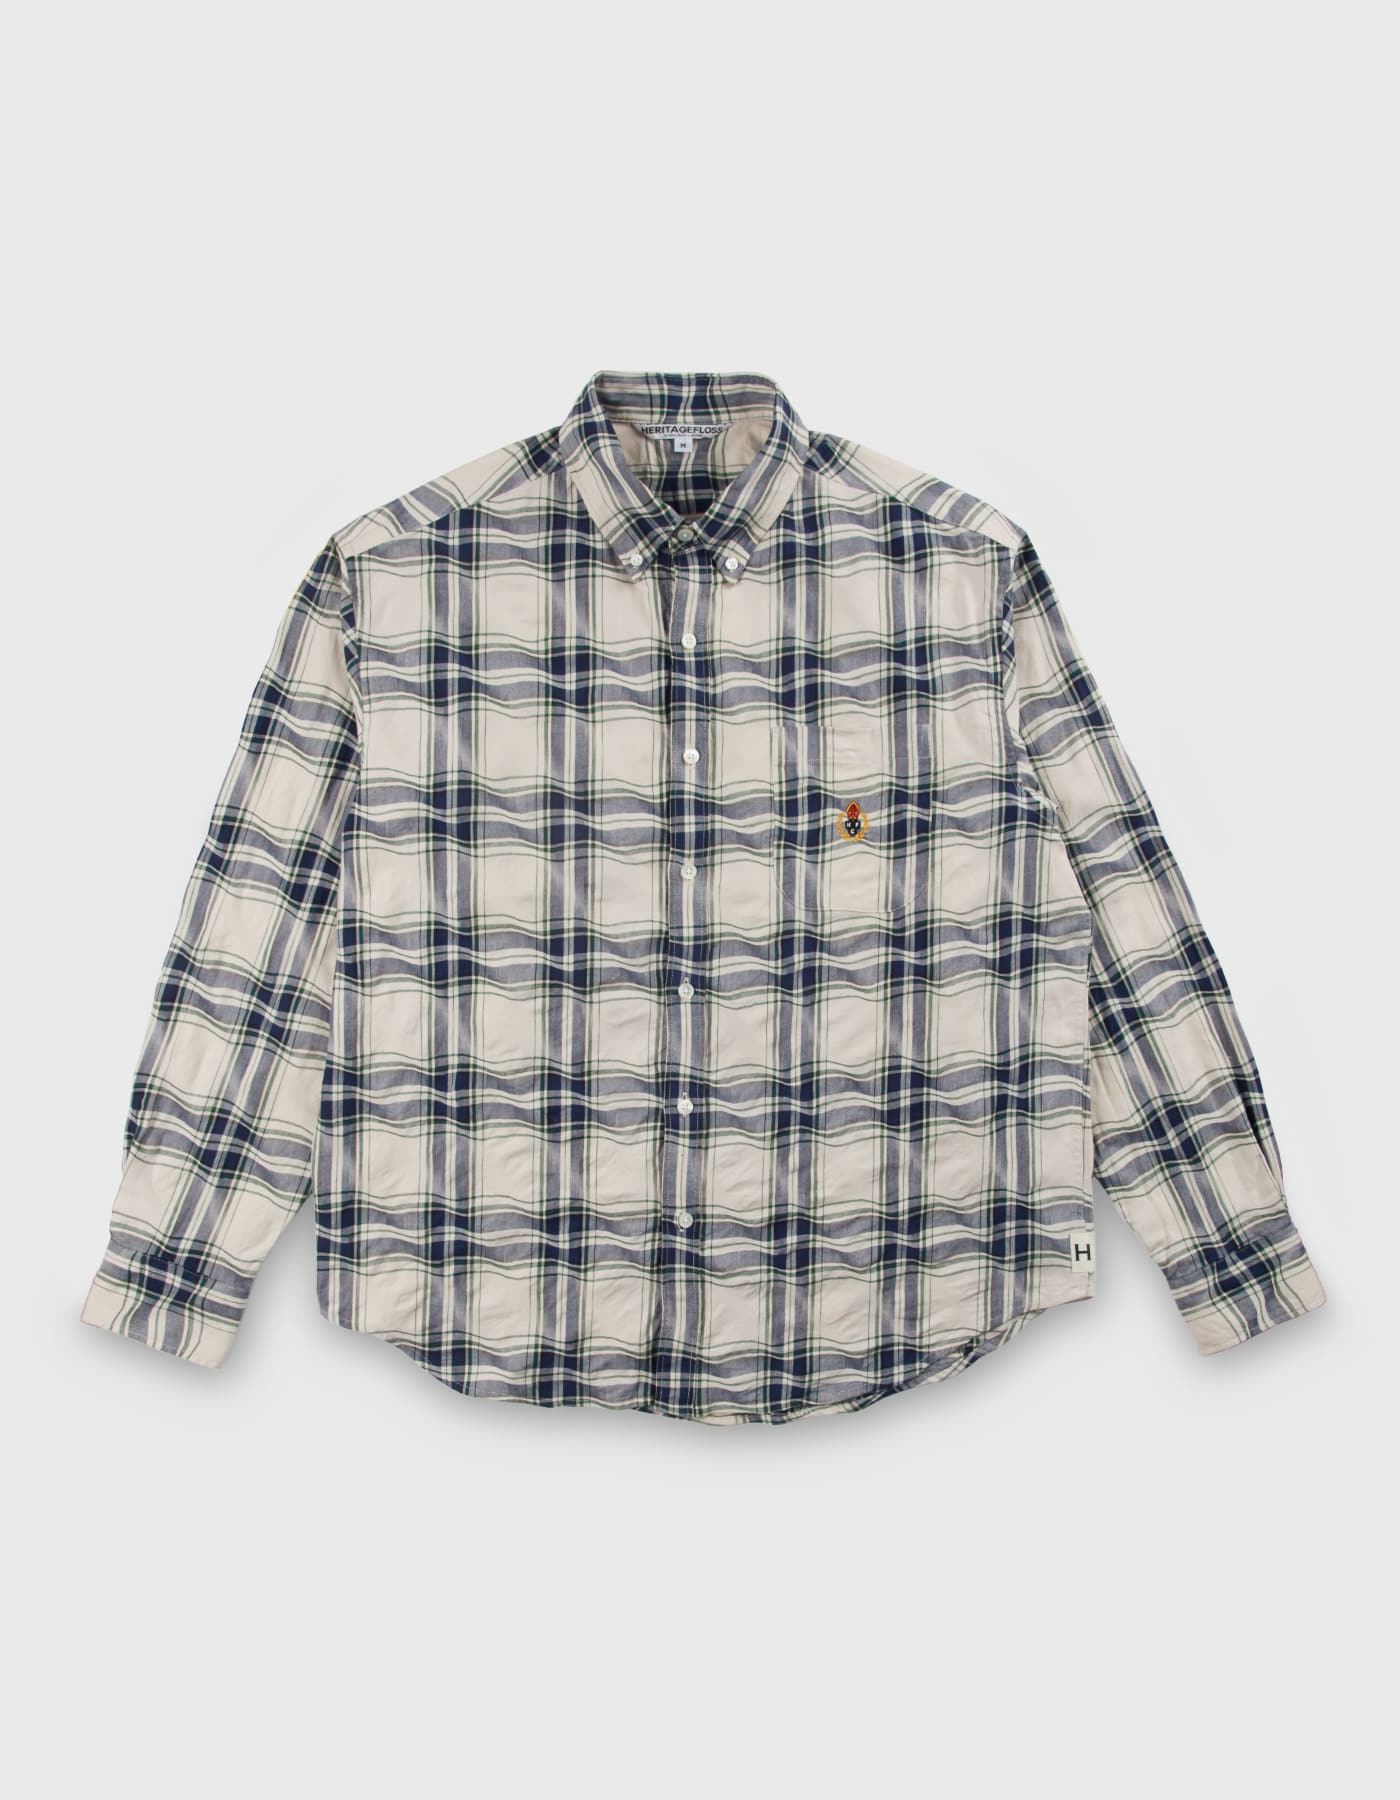 HFC CREST CHECKED SHIRT / Blue-Green Check